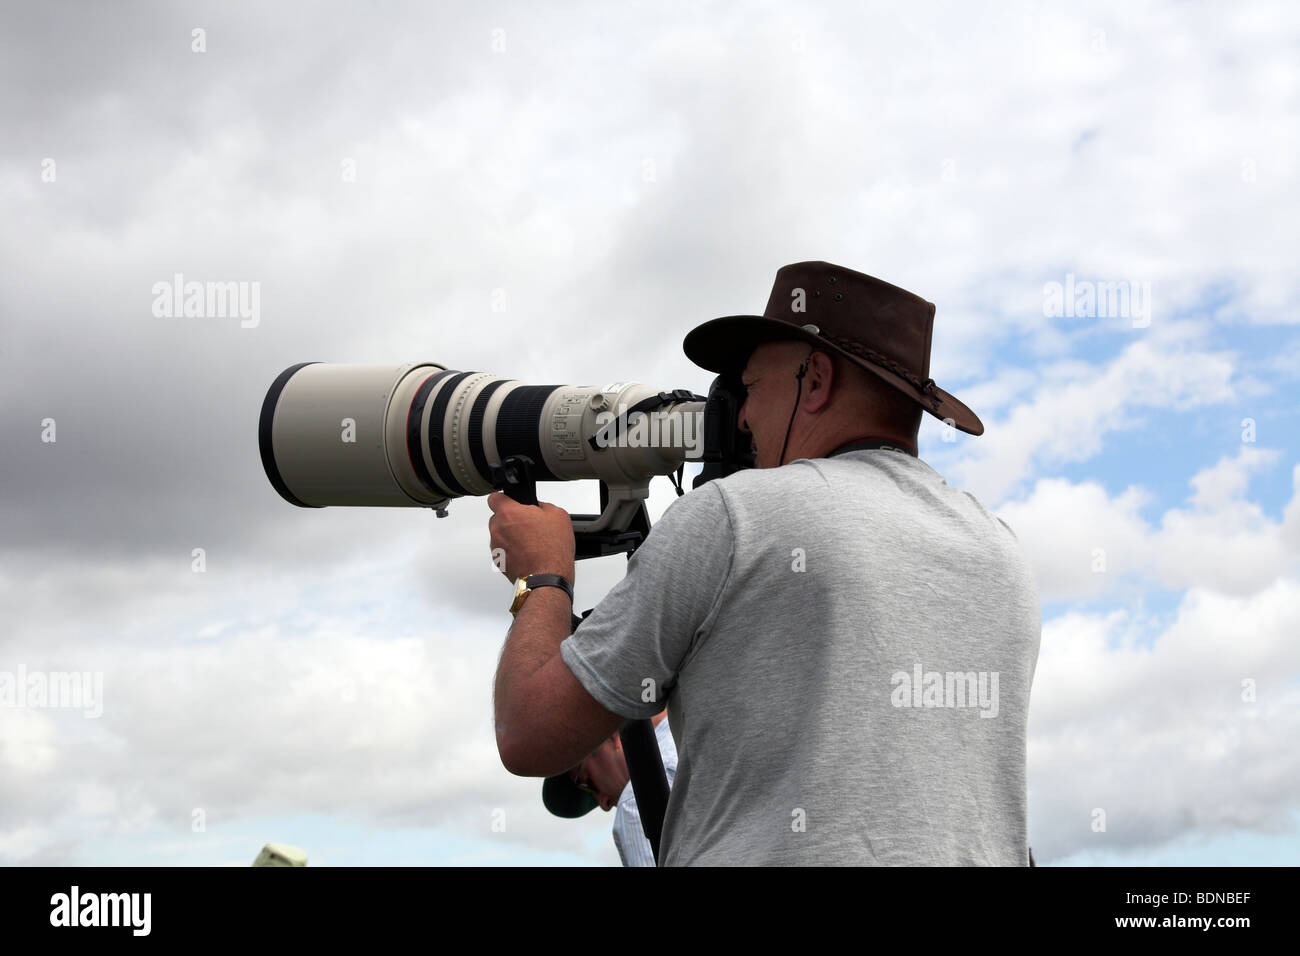 Photographer with a large telephoto lens Stock Photo